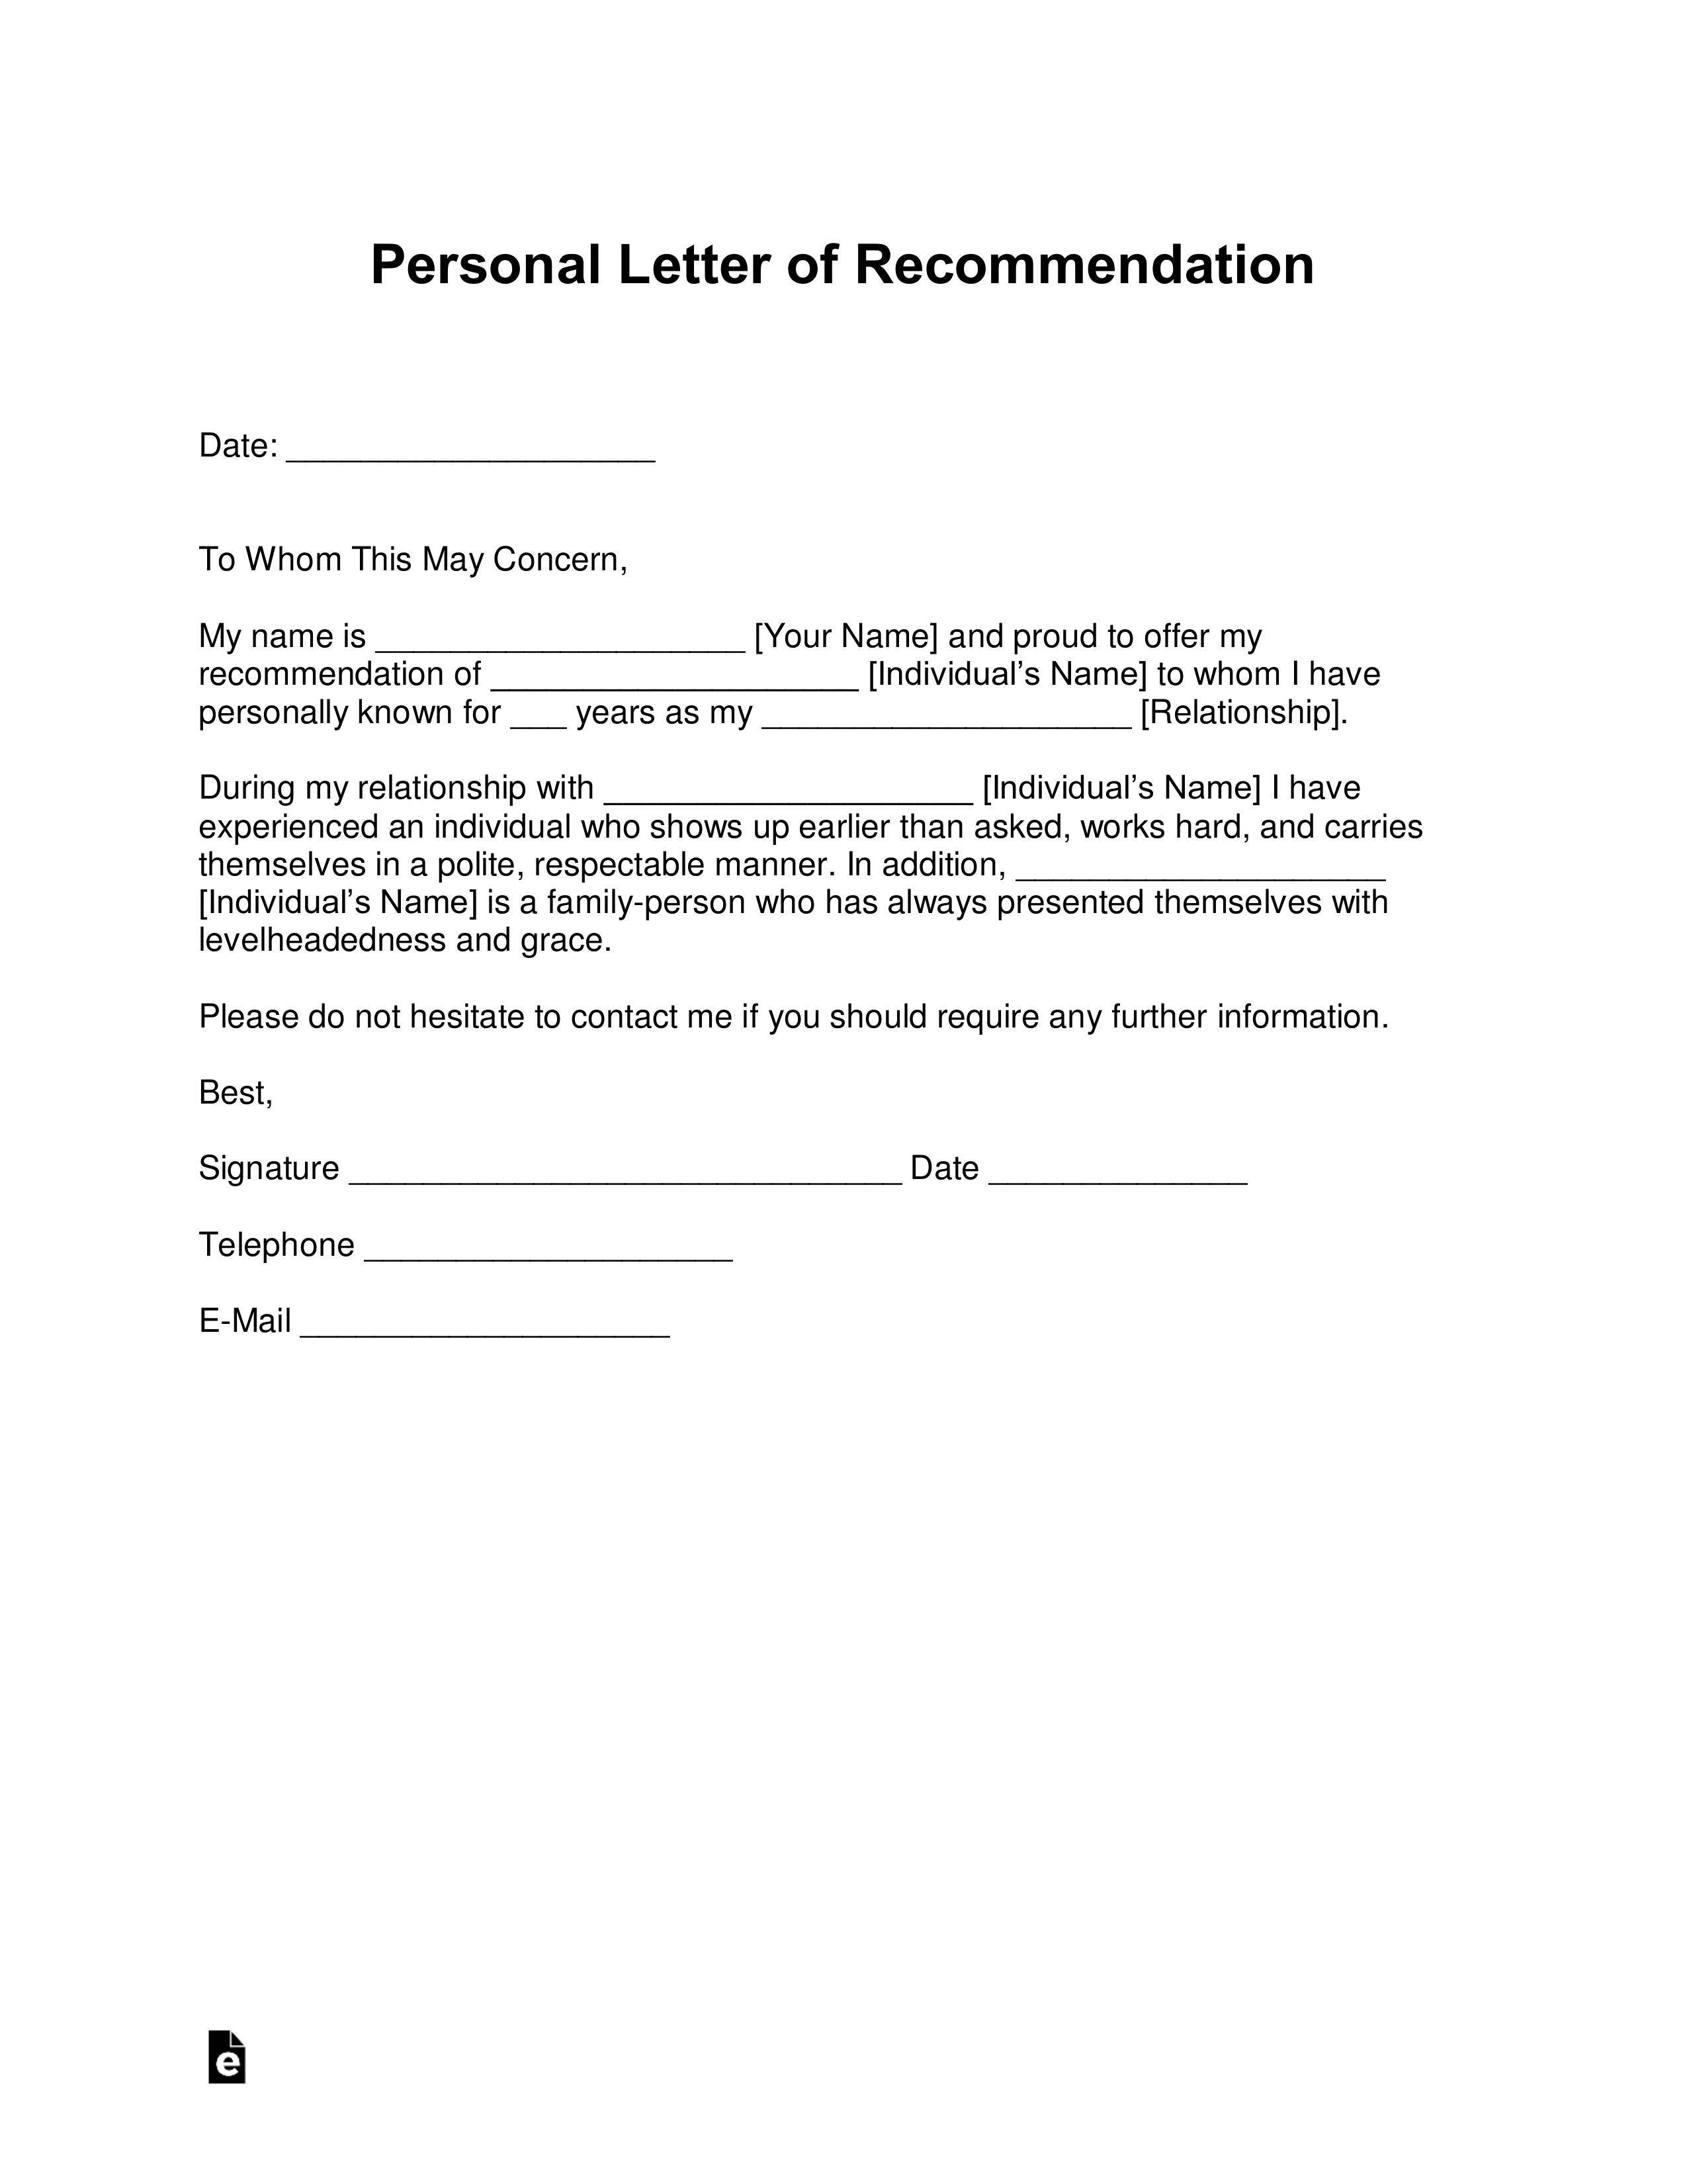 Letter Of Recommendation From Friend from eforms.com